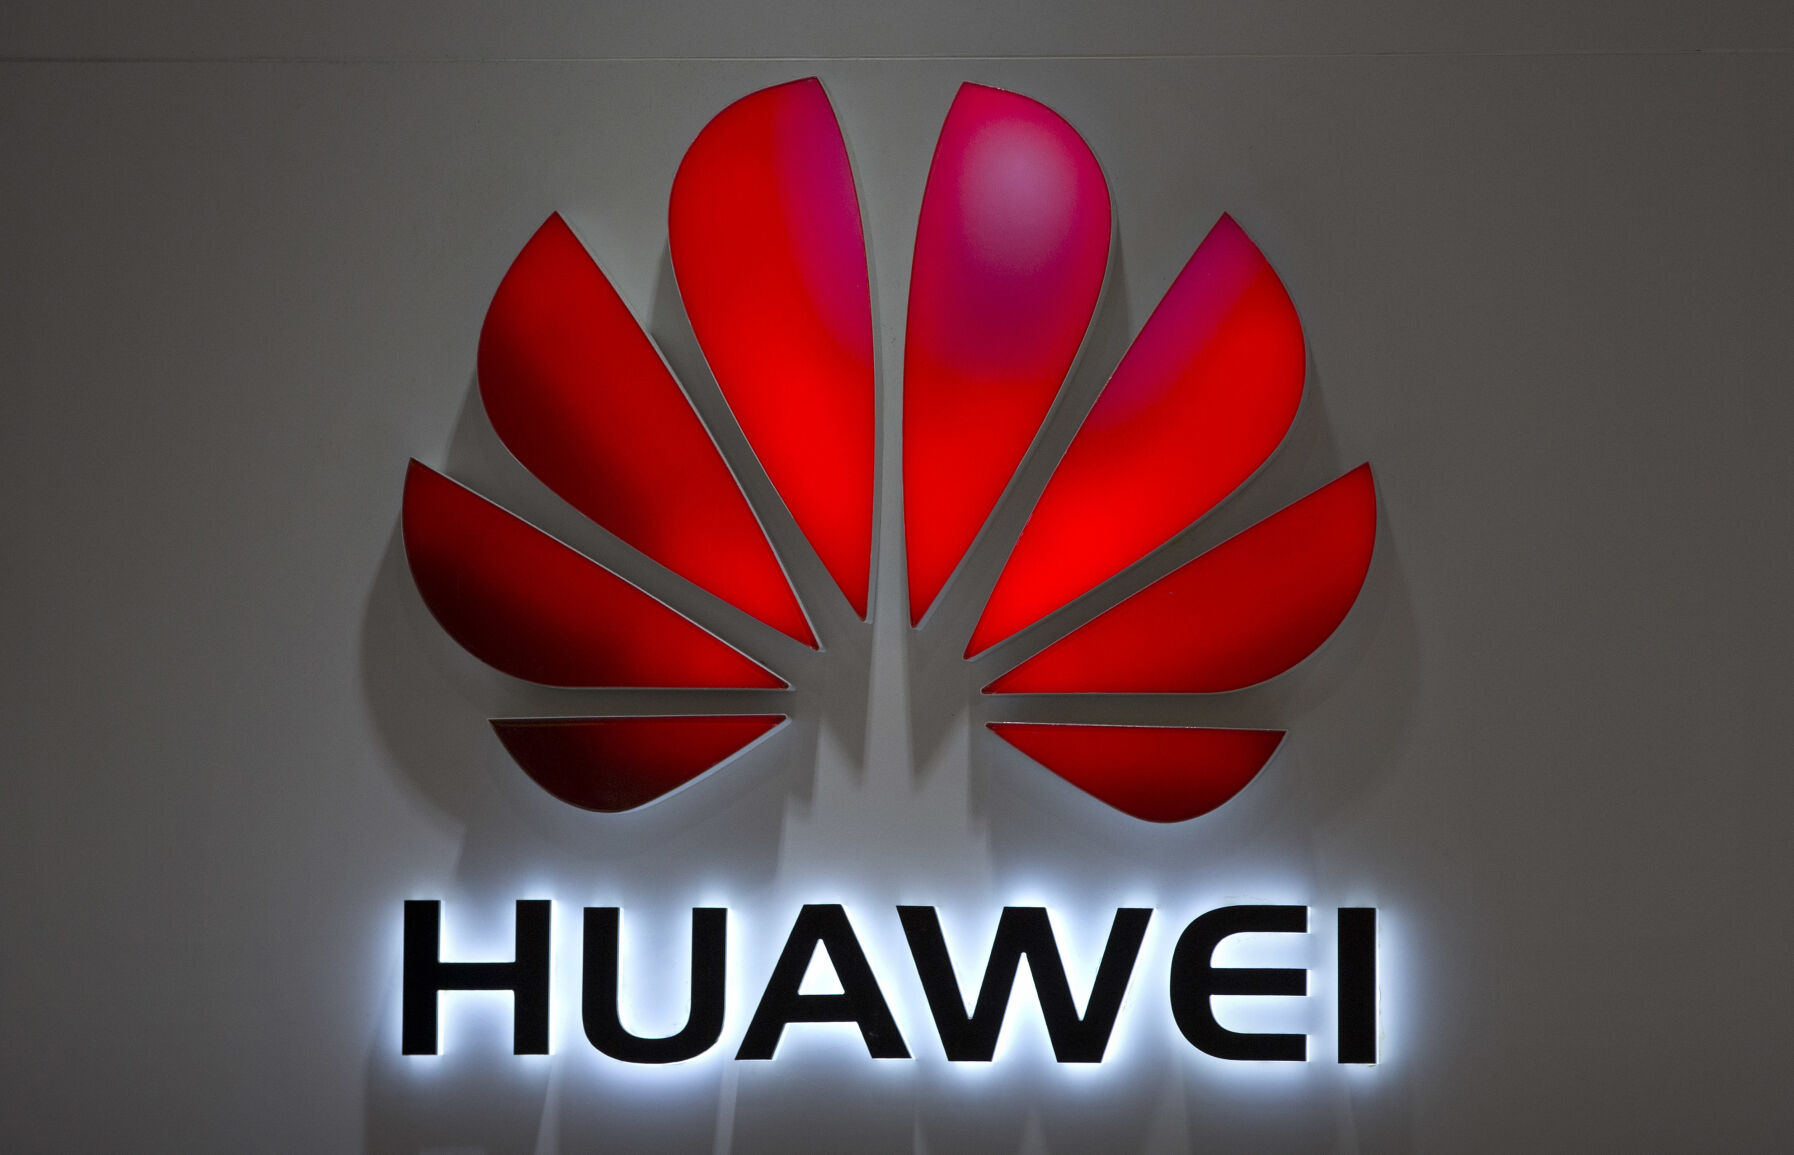 <p>FILE - The Huawei logo in a shopping mall in Beijing, July 4, 2018. A contingent of Chinese companies led by technology giant Huawei is turning out in force to the world’s biggest wireless trade fair, aiming to show their muscle in the face of Huawei’s blacklisting by Western nations concerned about cybersecurity and escalating tensions with the U.S. over TikTok, spy balloons and computer chips. (AP Photo/Mark Schiefelbein, File)</p>   PHOTO CREDIT: Mark Schiefelbein 